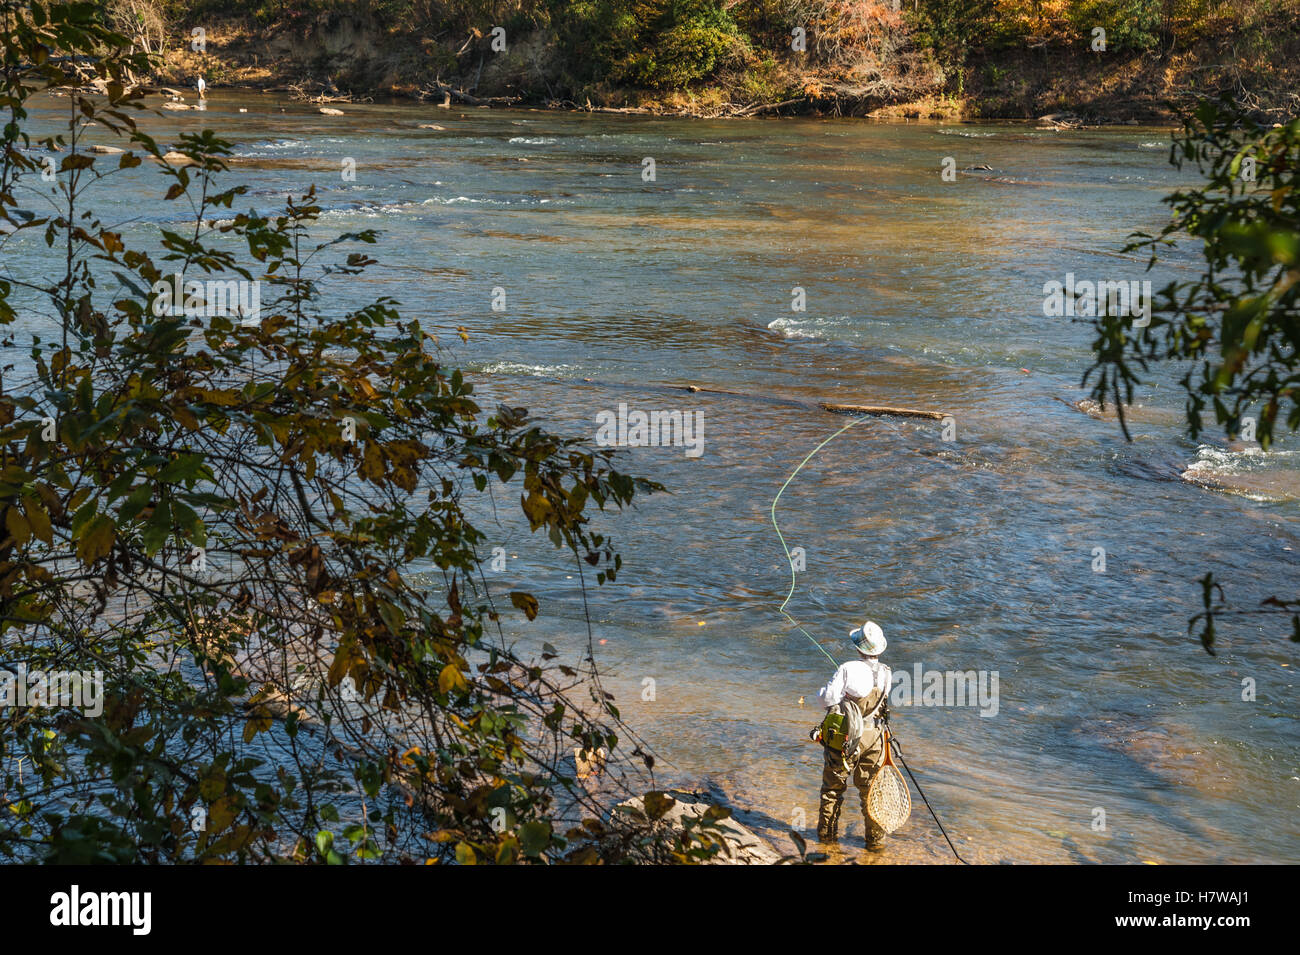 Fly fishing at the Chattahoochee River National Recreation Area at Paces Mill in Atlanta, Georgia, USA. Stock Photo